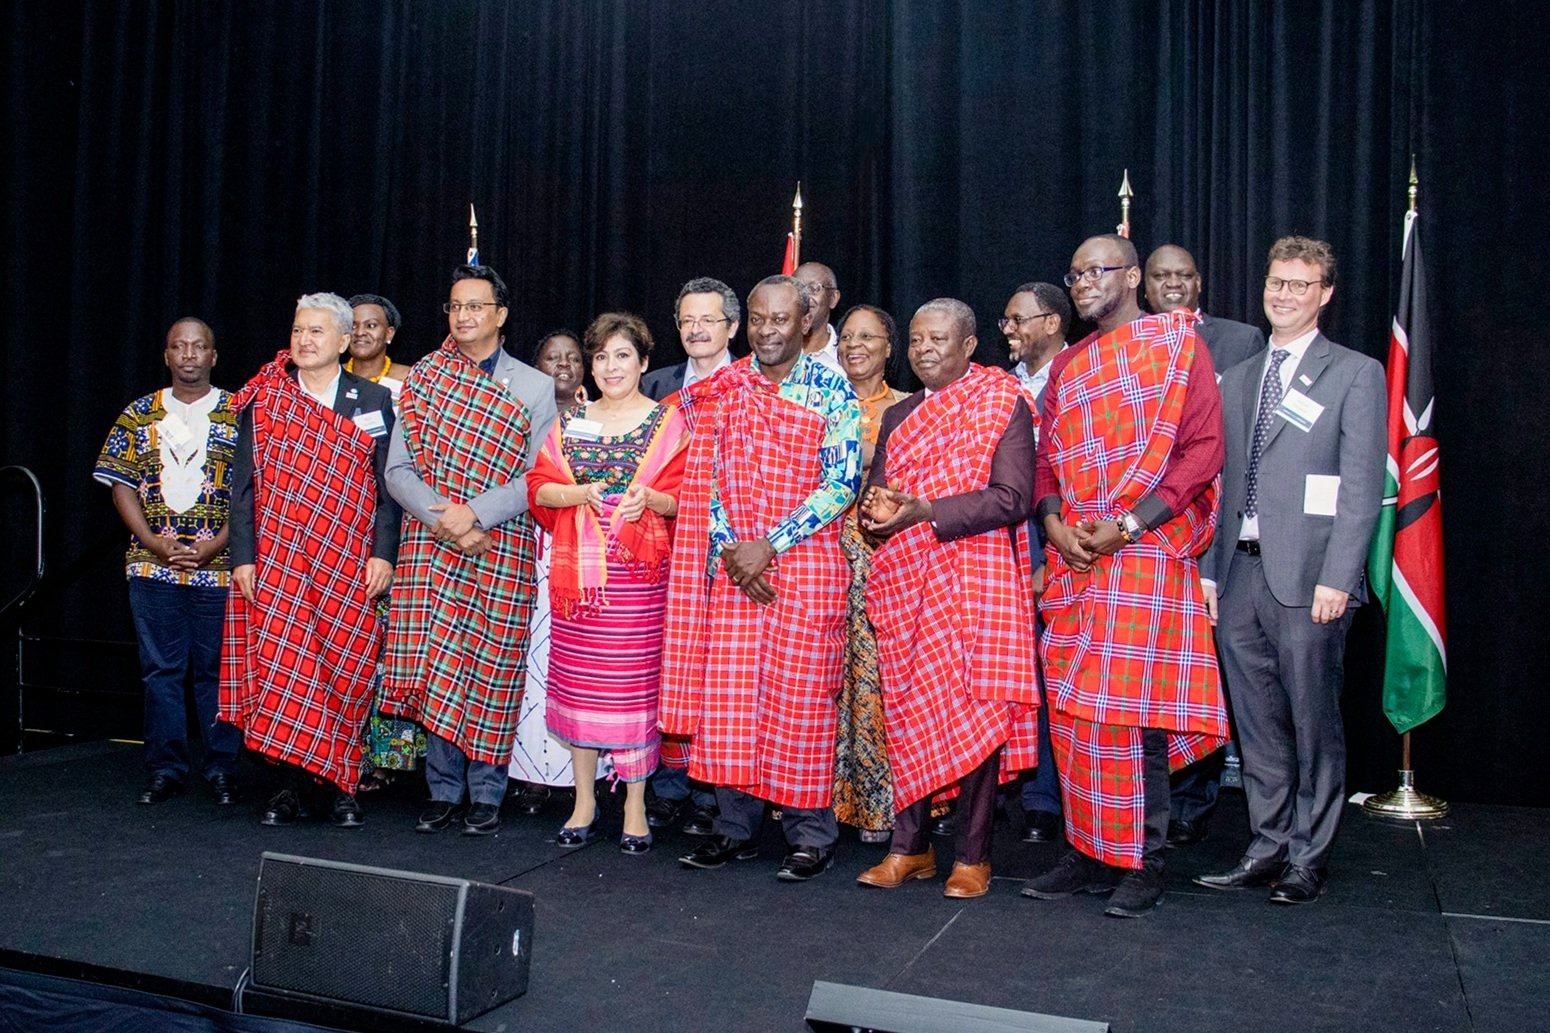  Leaders from AMPATH Kenya welcome leaders from new partnerships in Ghana, Mexico and Nepal with a ceremonial Maasai Shuka presentation at the AMPATH Global Gathering. This presentation of the fabric was a way to say “welcome to the greater AMPATH fa